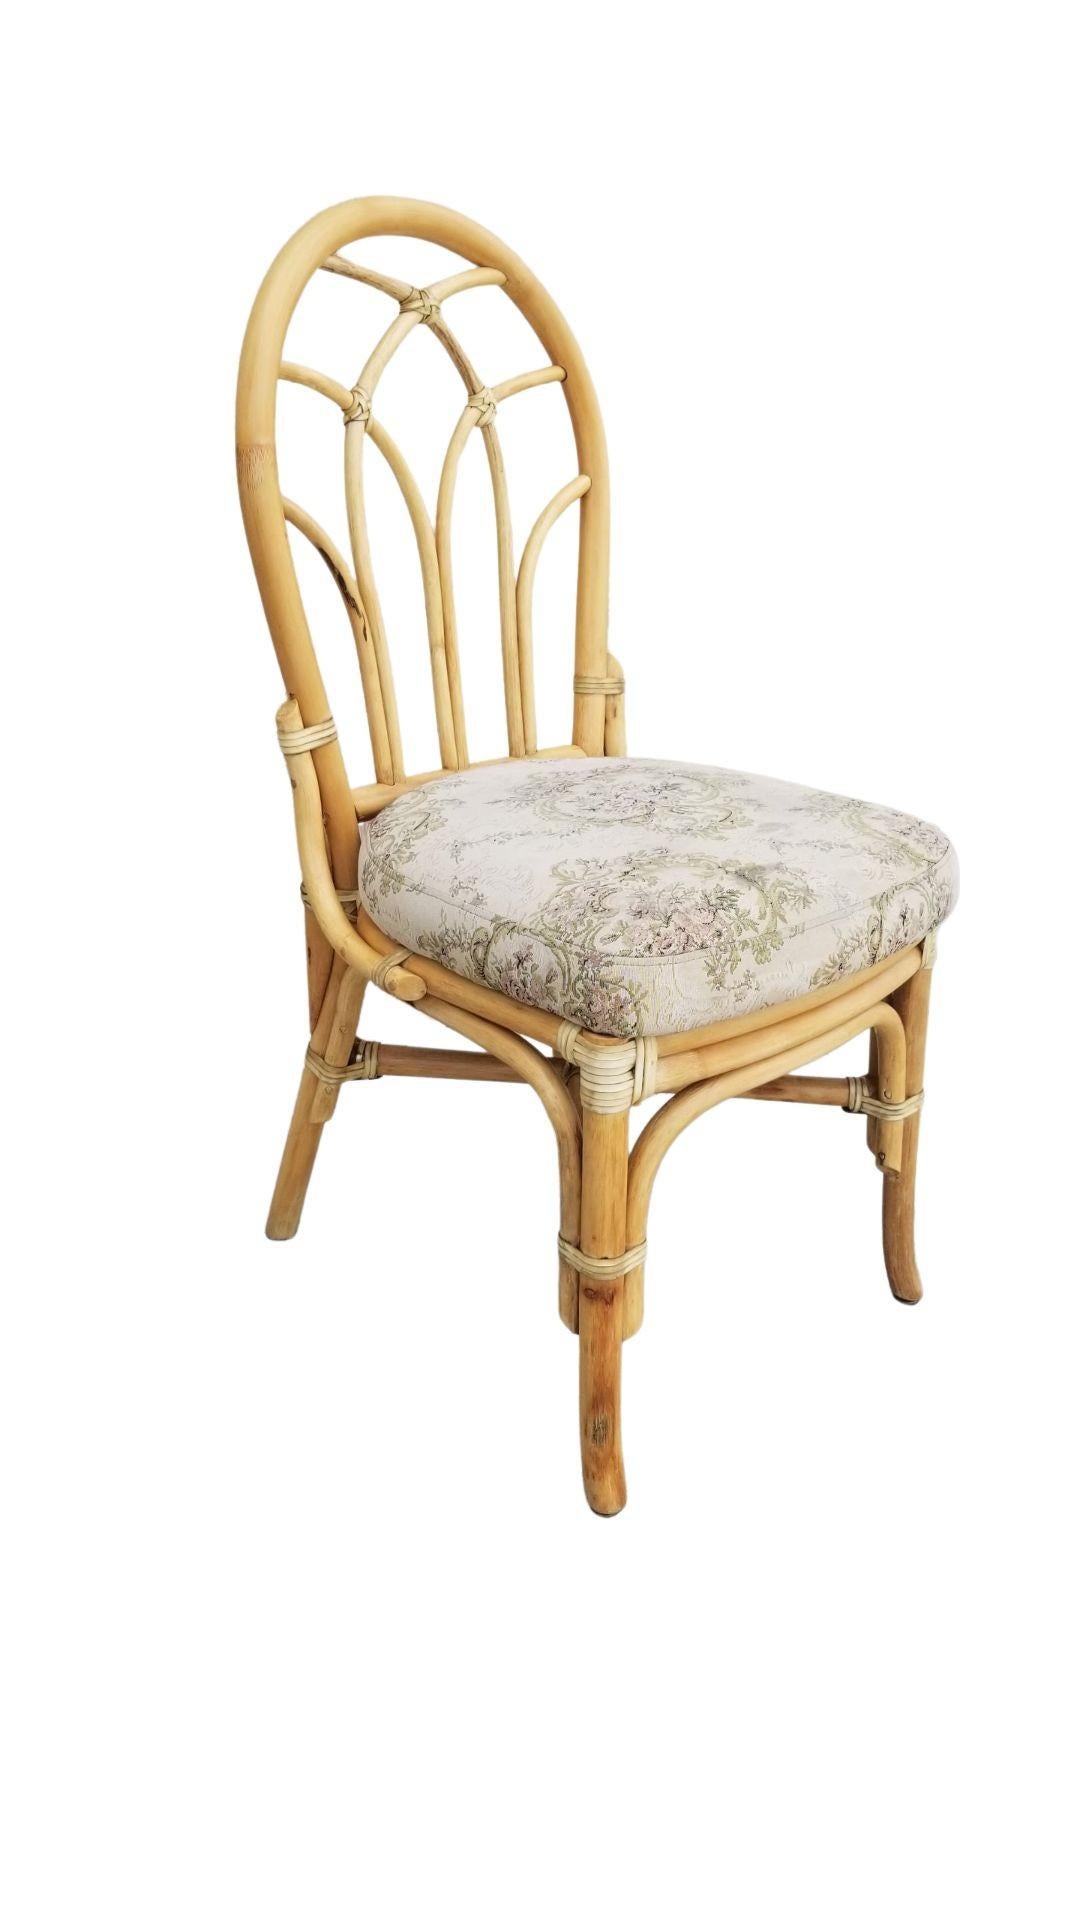 Set of 9 rattan dining chairs with an organic floral-like style back design. The seats are upholstered in a floral French provincial-style fabric.
All rattan, bamboo, and wicker furniture has been painstakingly refurbished to the highest standards